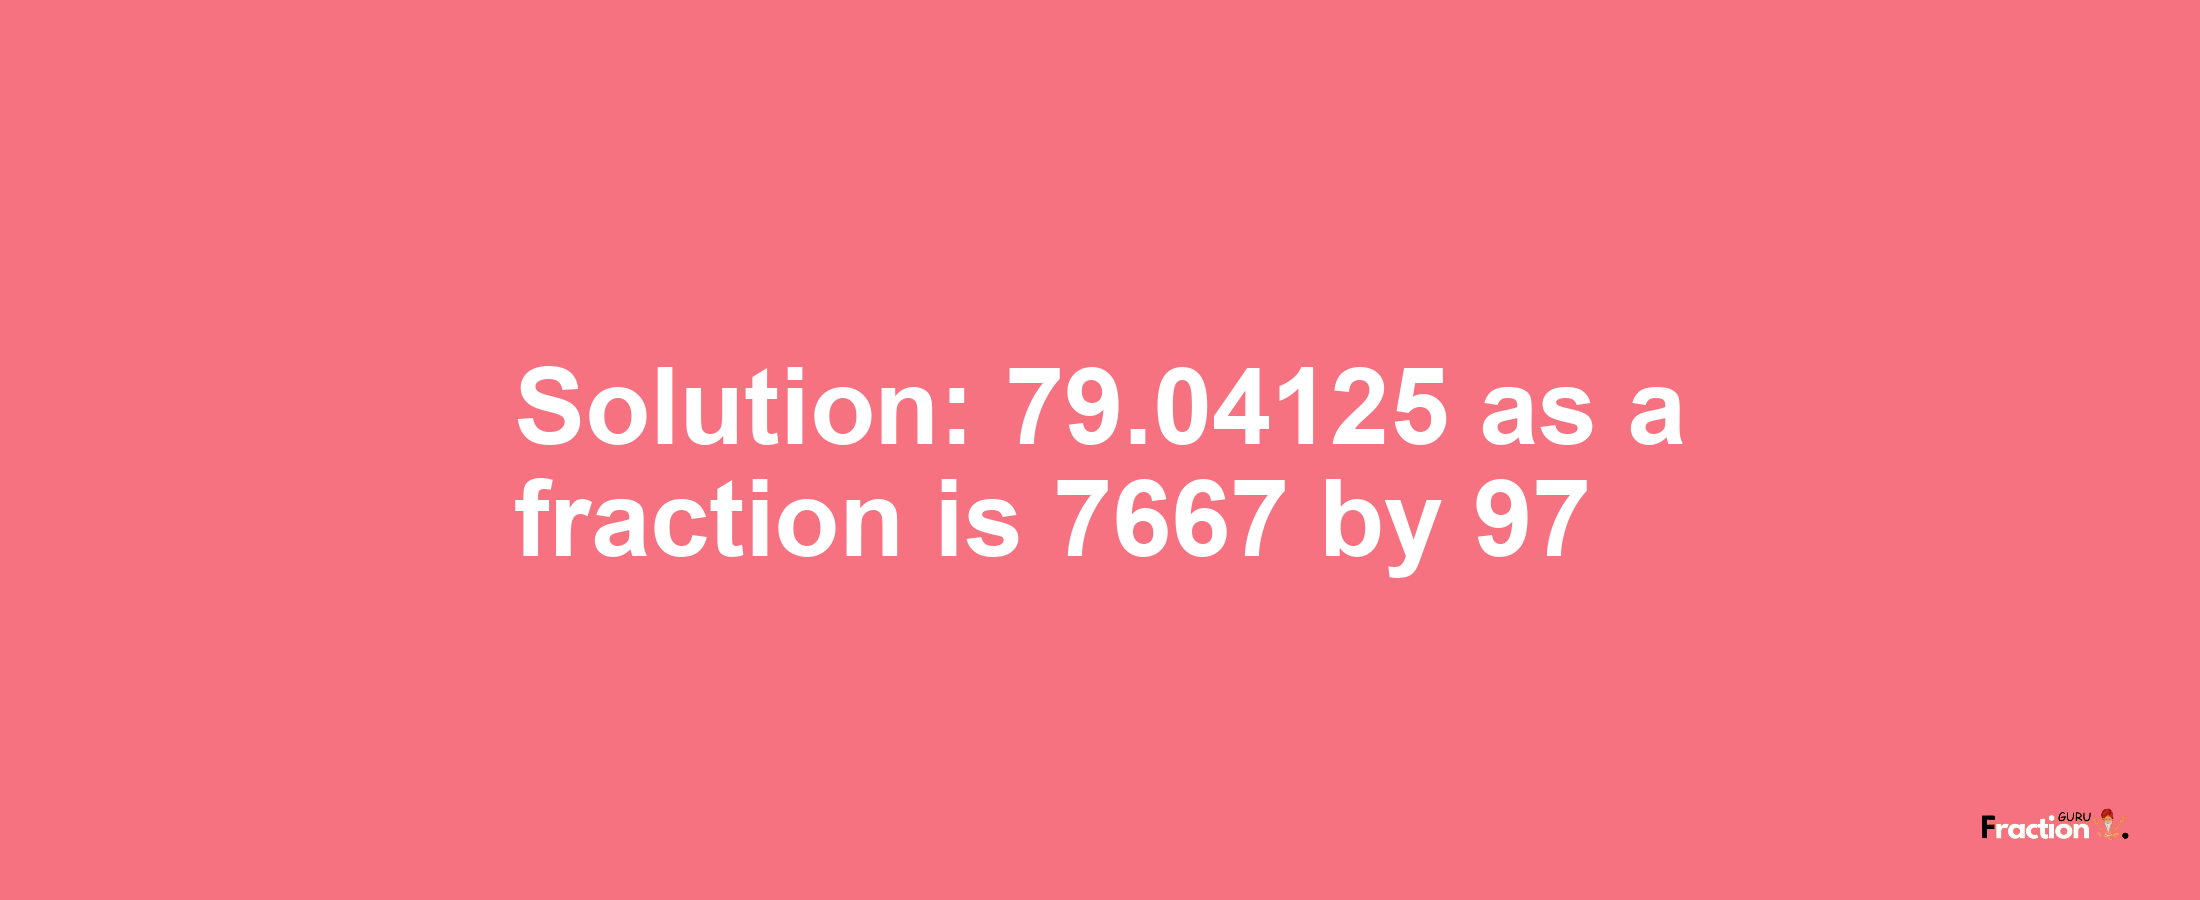 Solution:79.04125 as a fraction is 7667/97